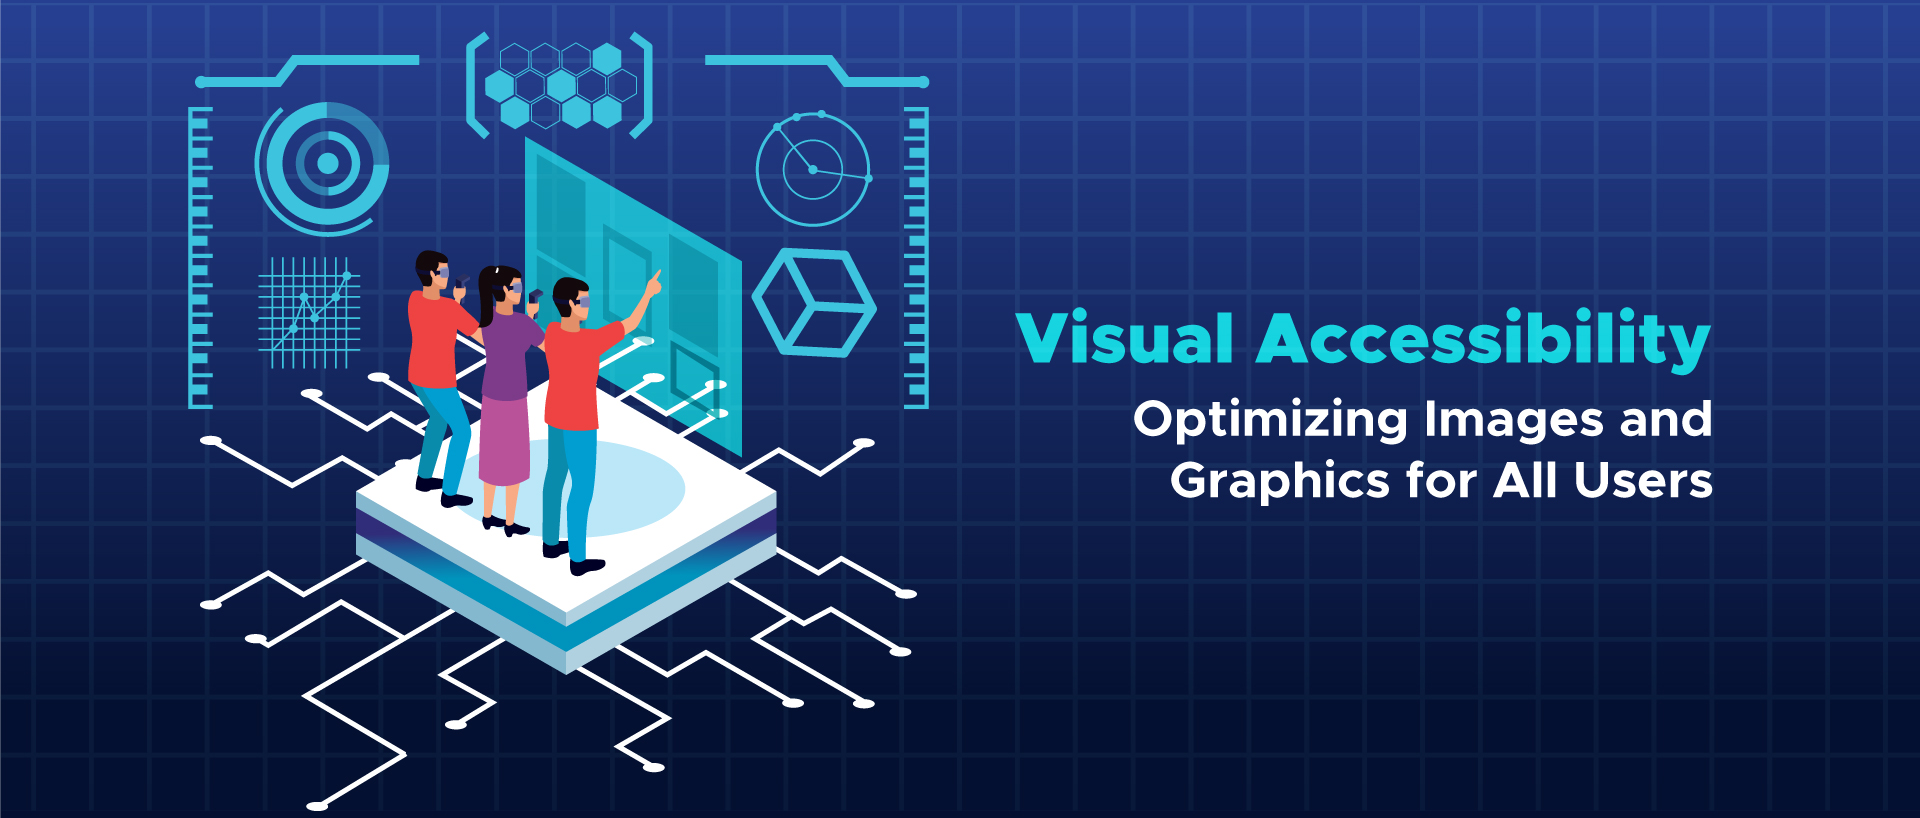 Visual Accessibility: Optimizing Images and Graphics for All Users